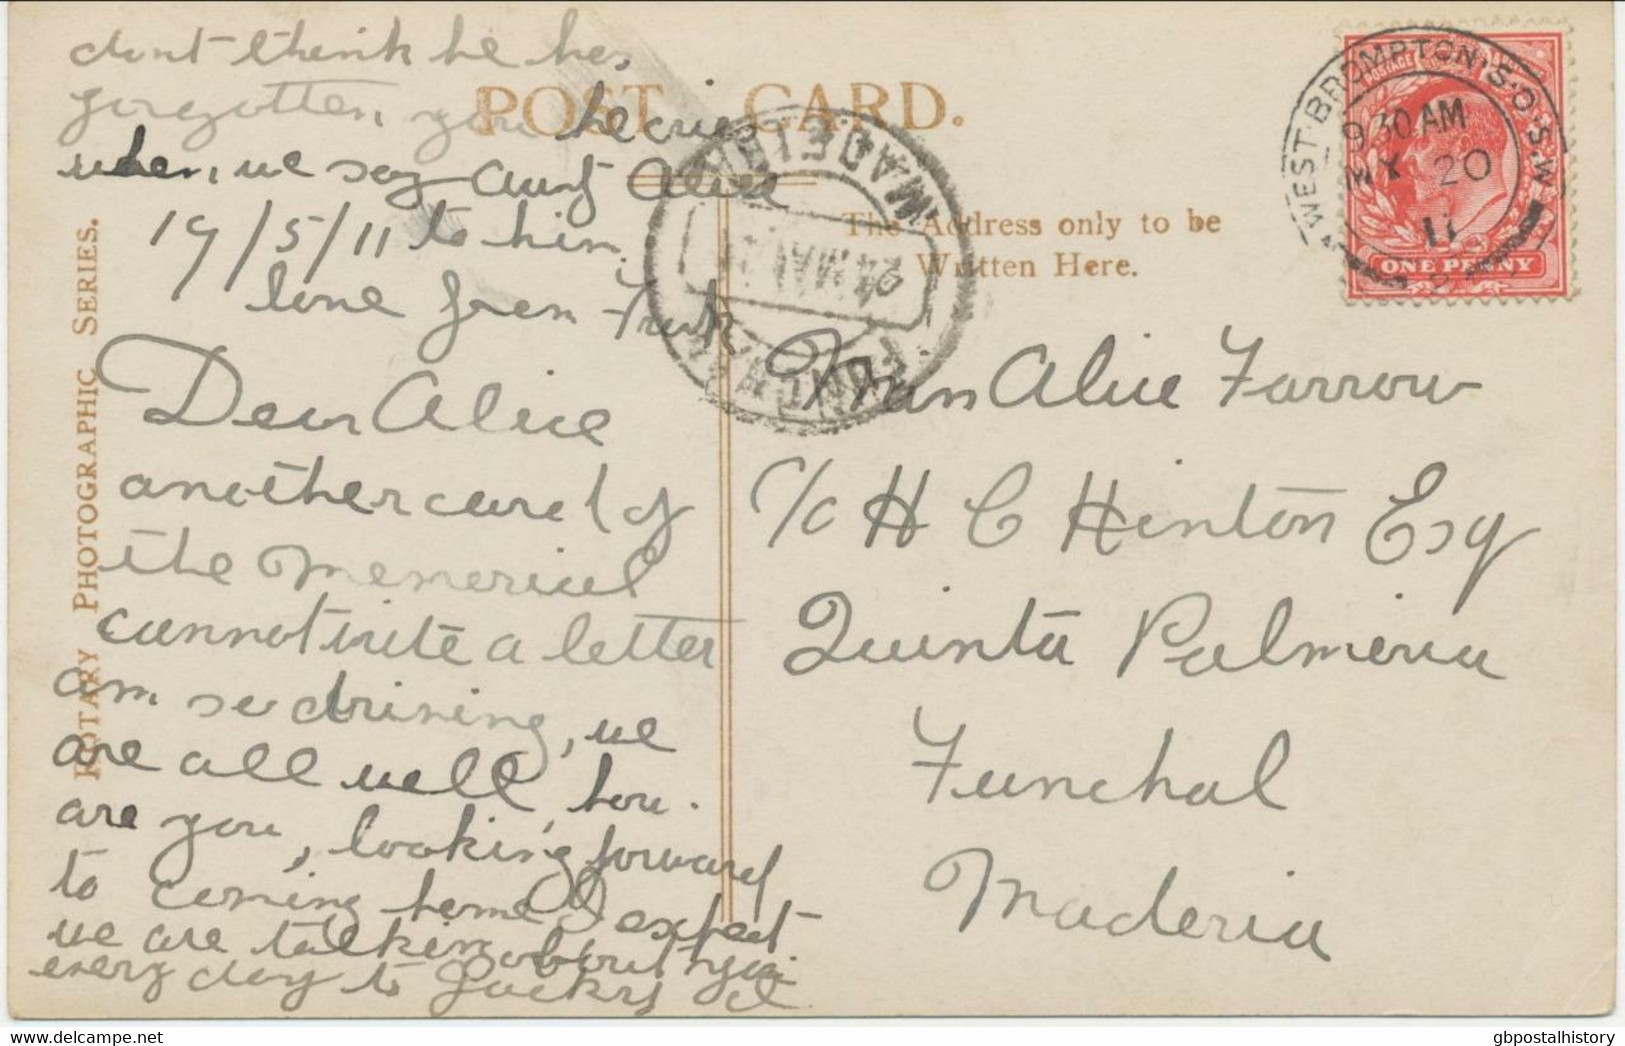 GB DESTINATIONS MADEIRA FUNCHAL 1911 EVII 1D HARRISON PRINTING WEST-BROMPTON-S.O - Covers & Documents